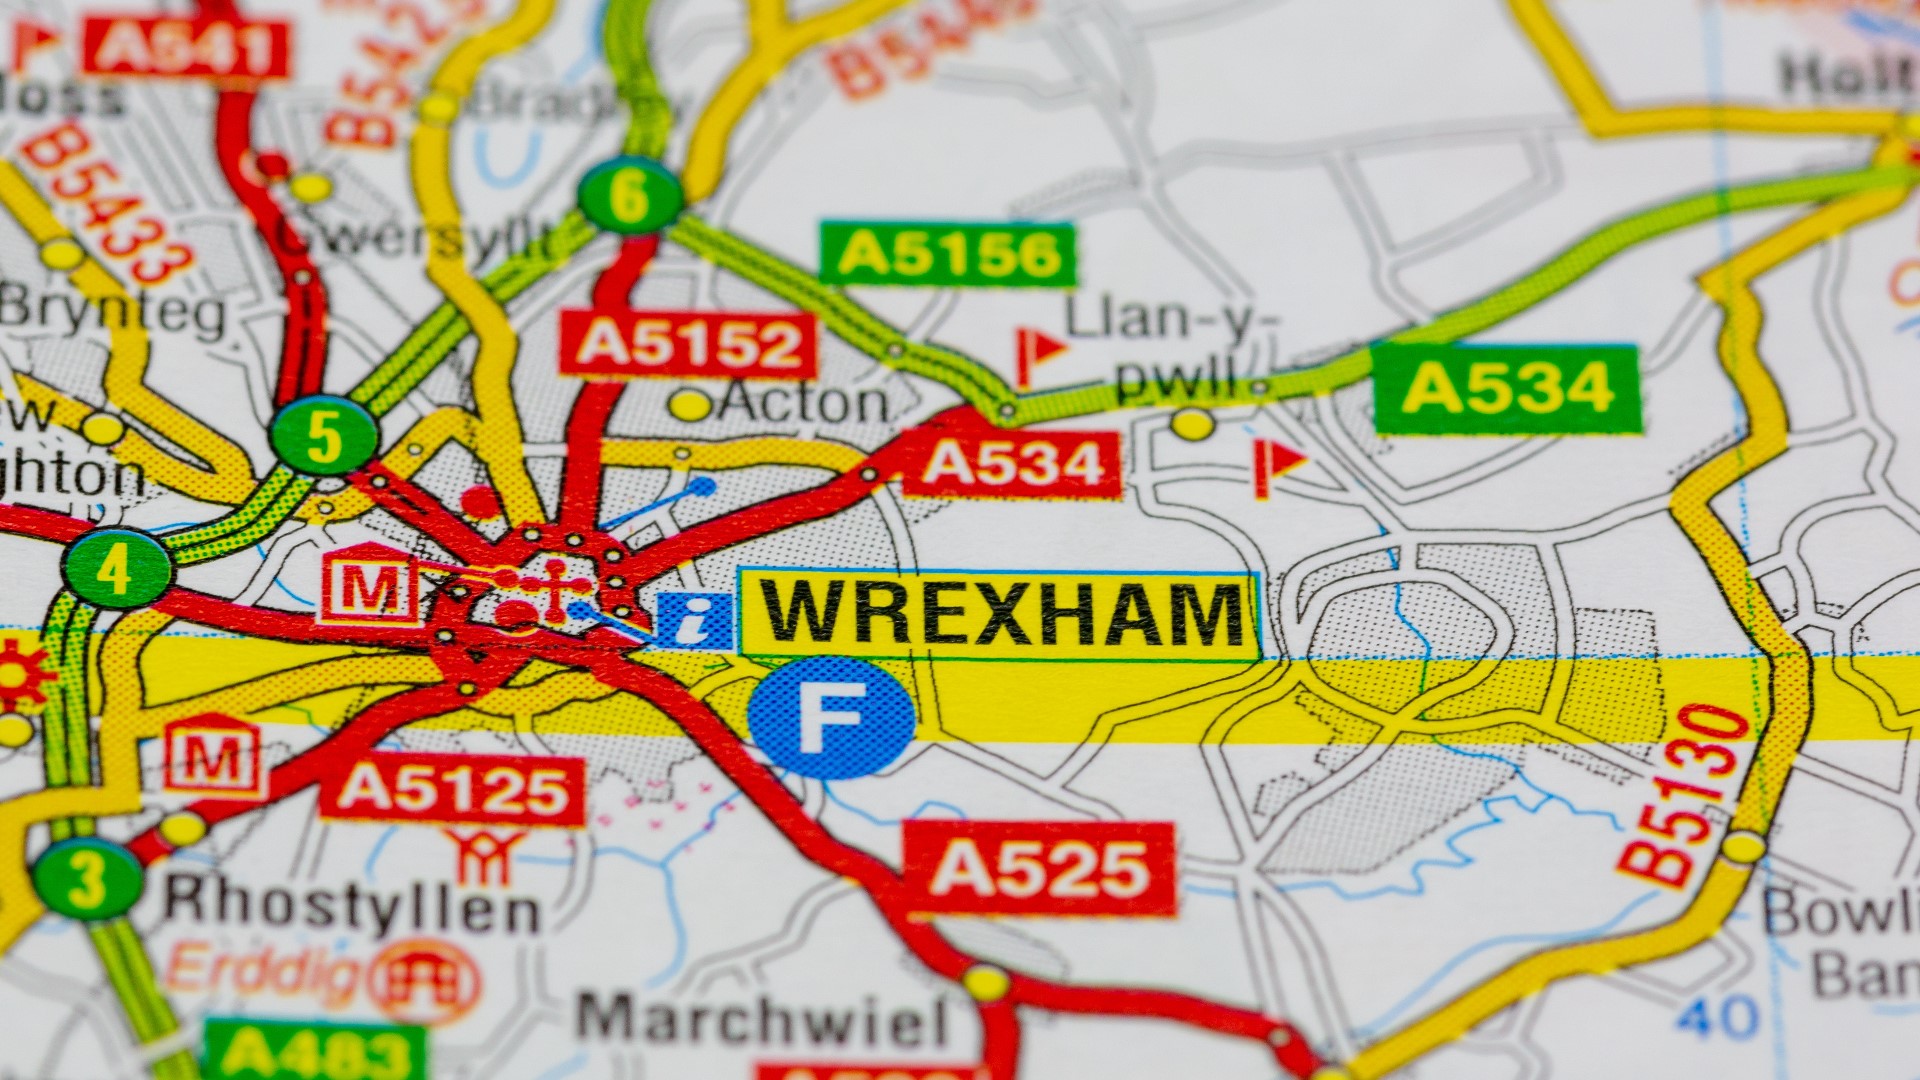 Humphrey Ker, Wrexham AFC's Executive Director gives us a sneak peek into season two of 'Welcome to Wrexham' on FX.